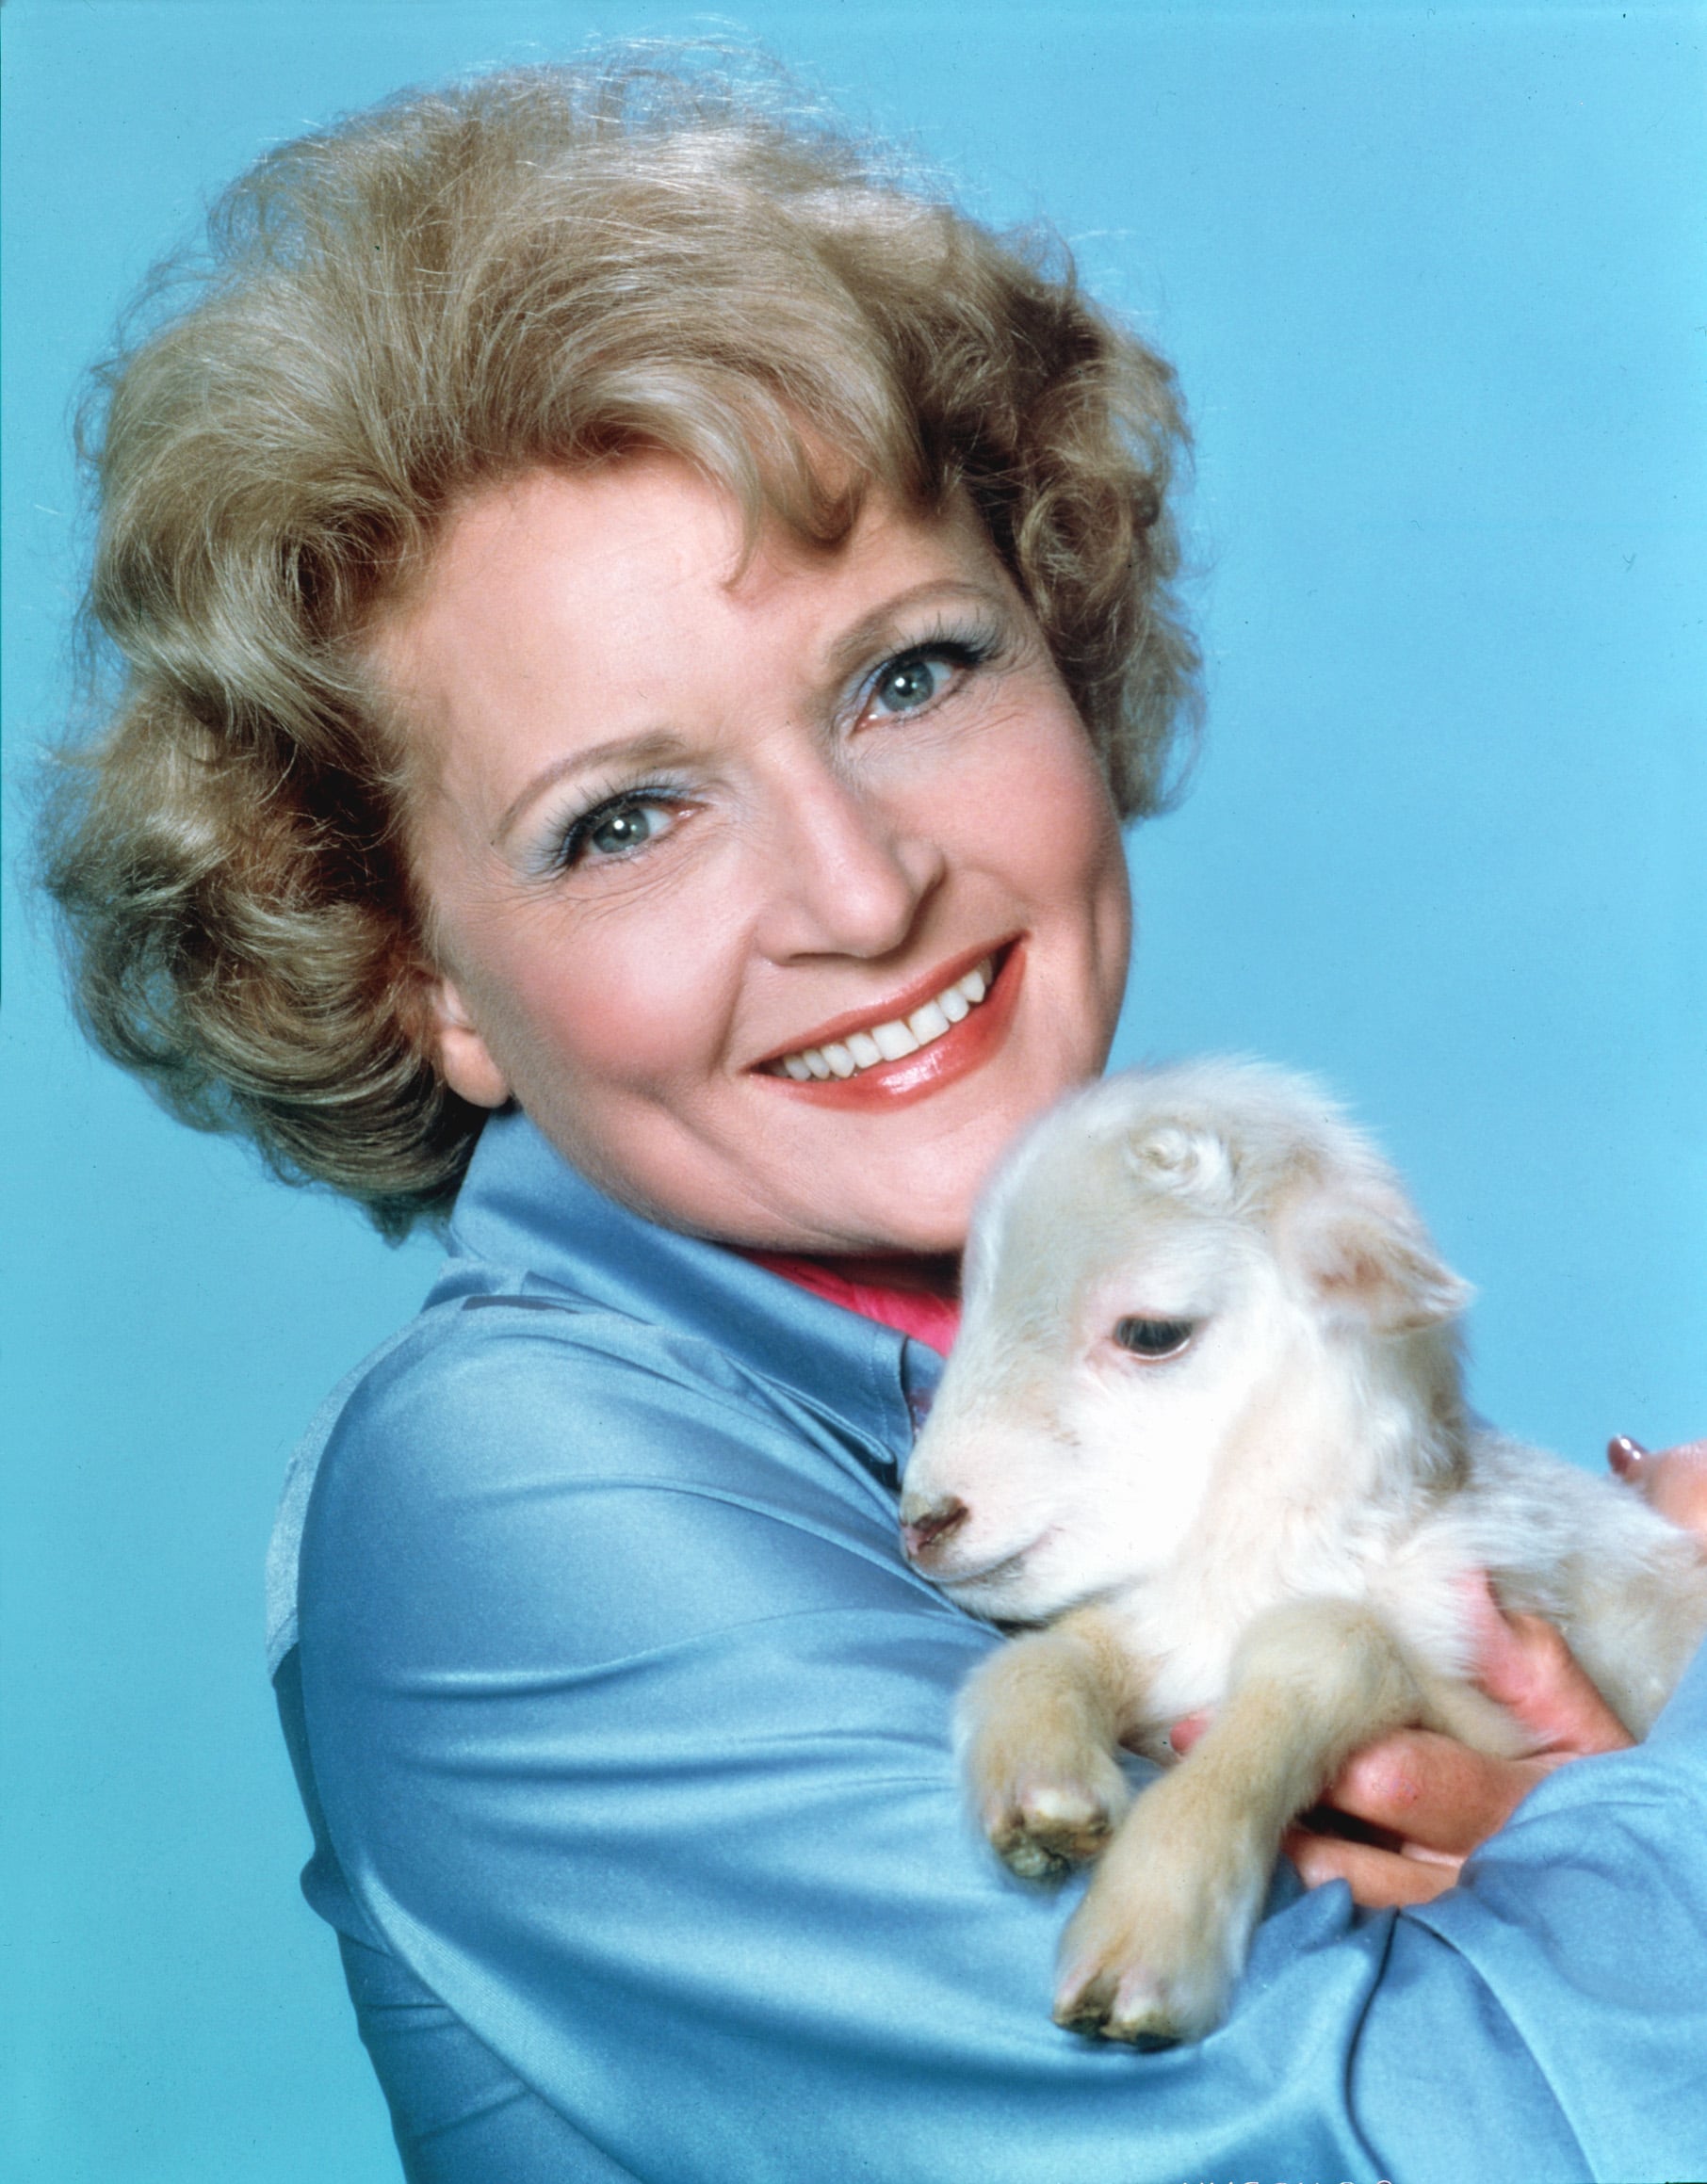 Betty White with a baby goat